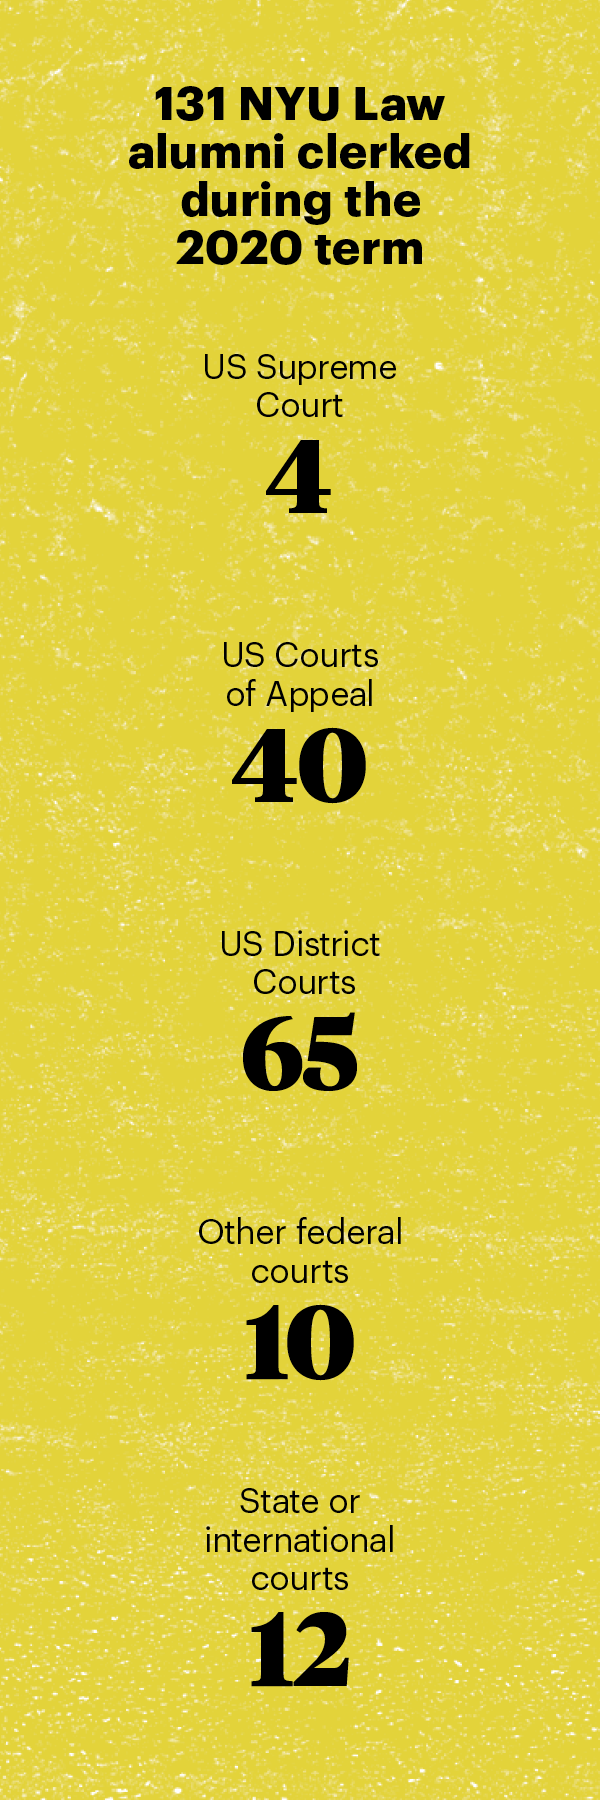 131 NYU Law alumni clerked during the 2020 term: US Supreme Court: 4; US Courts of Appeal: 40; US District Courts: 65; Other federal courts: 10; State or international courts: 12